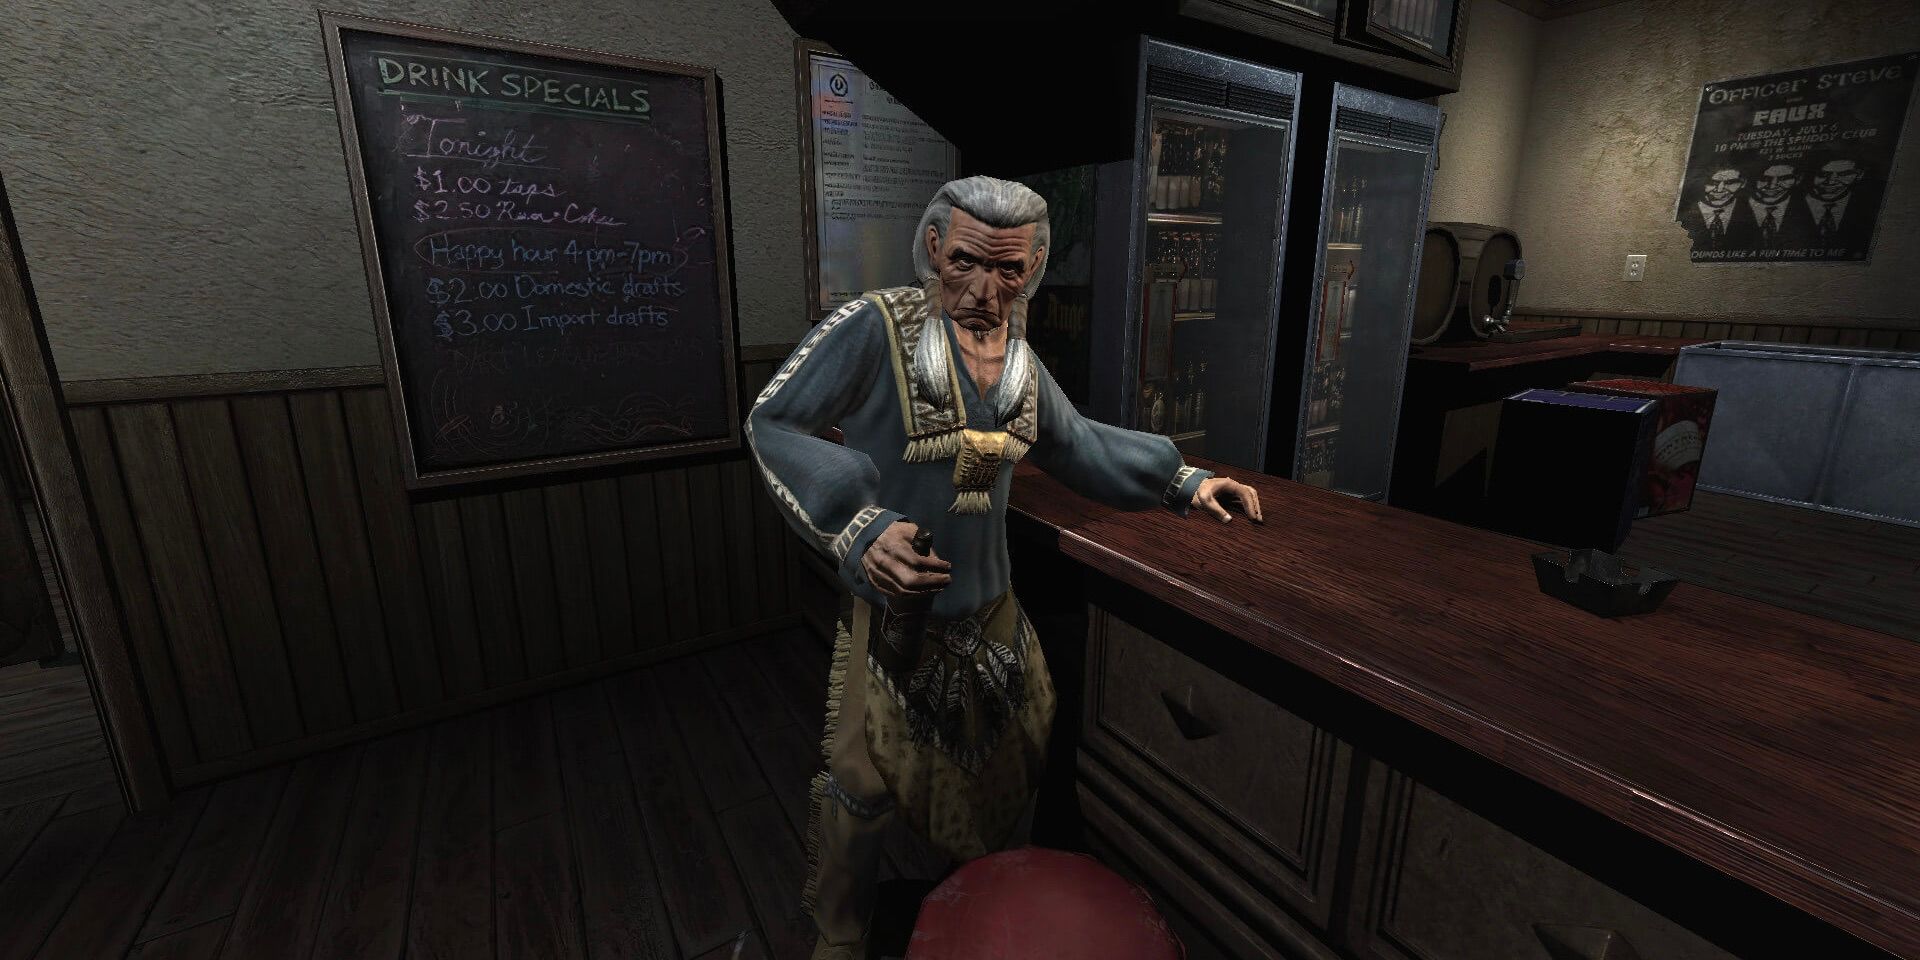 A screenshot from the 2006 videogame Prey showing an old man leaning on a bar